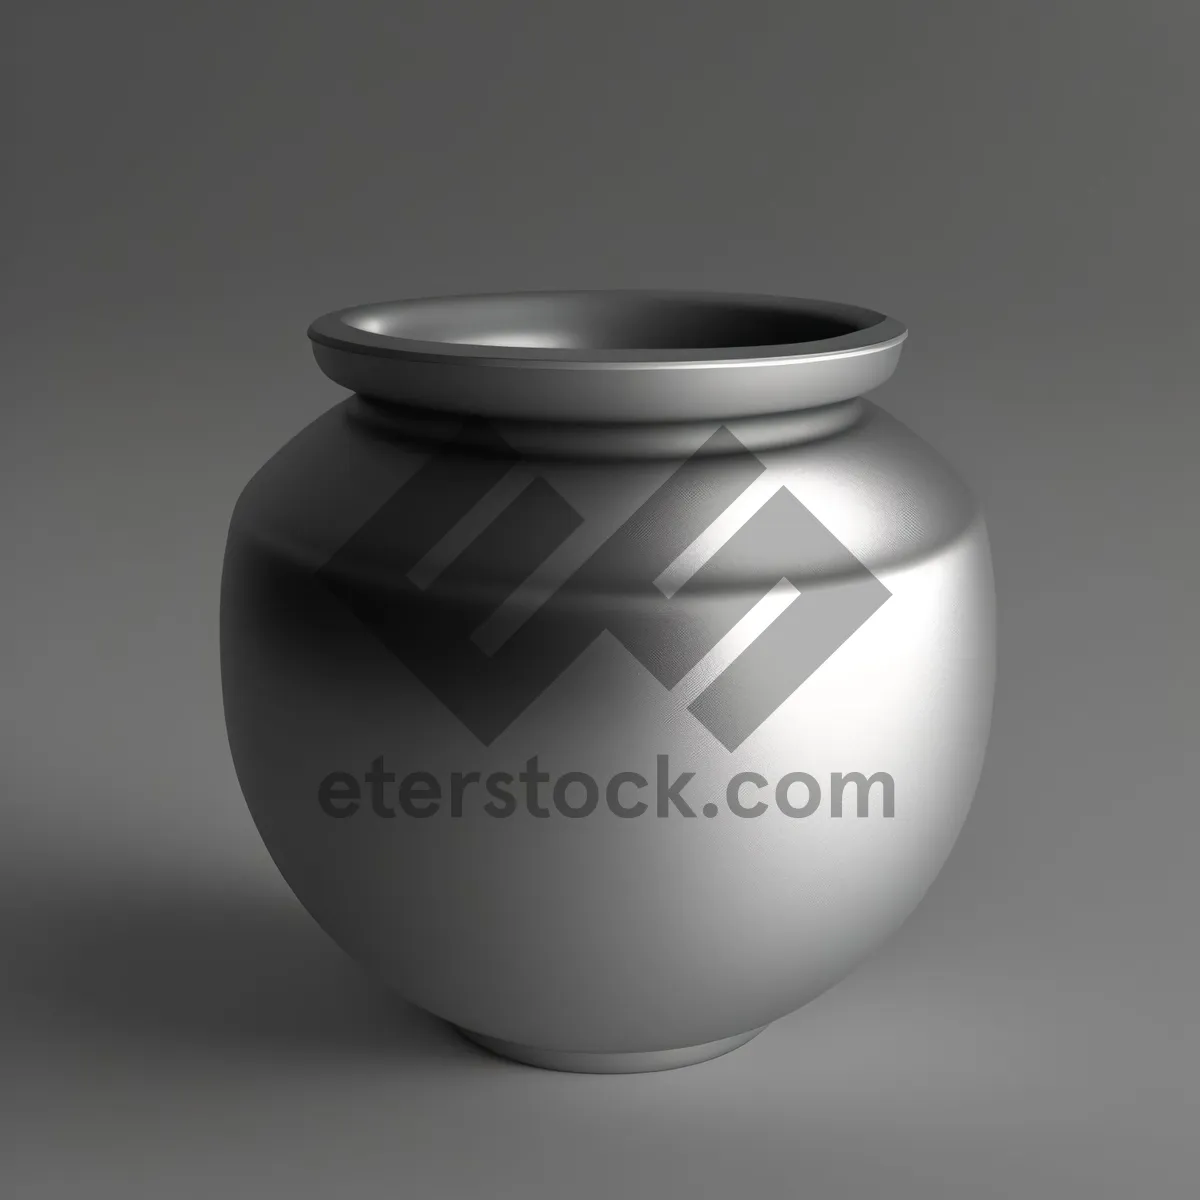 Picture of Ceramic Mixing Bowl with Drink Utensil and Glass